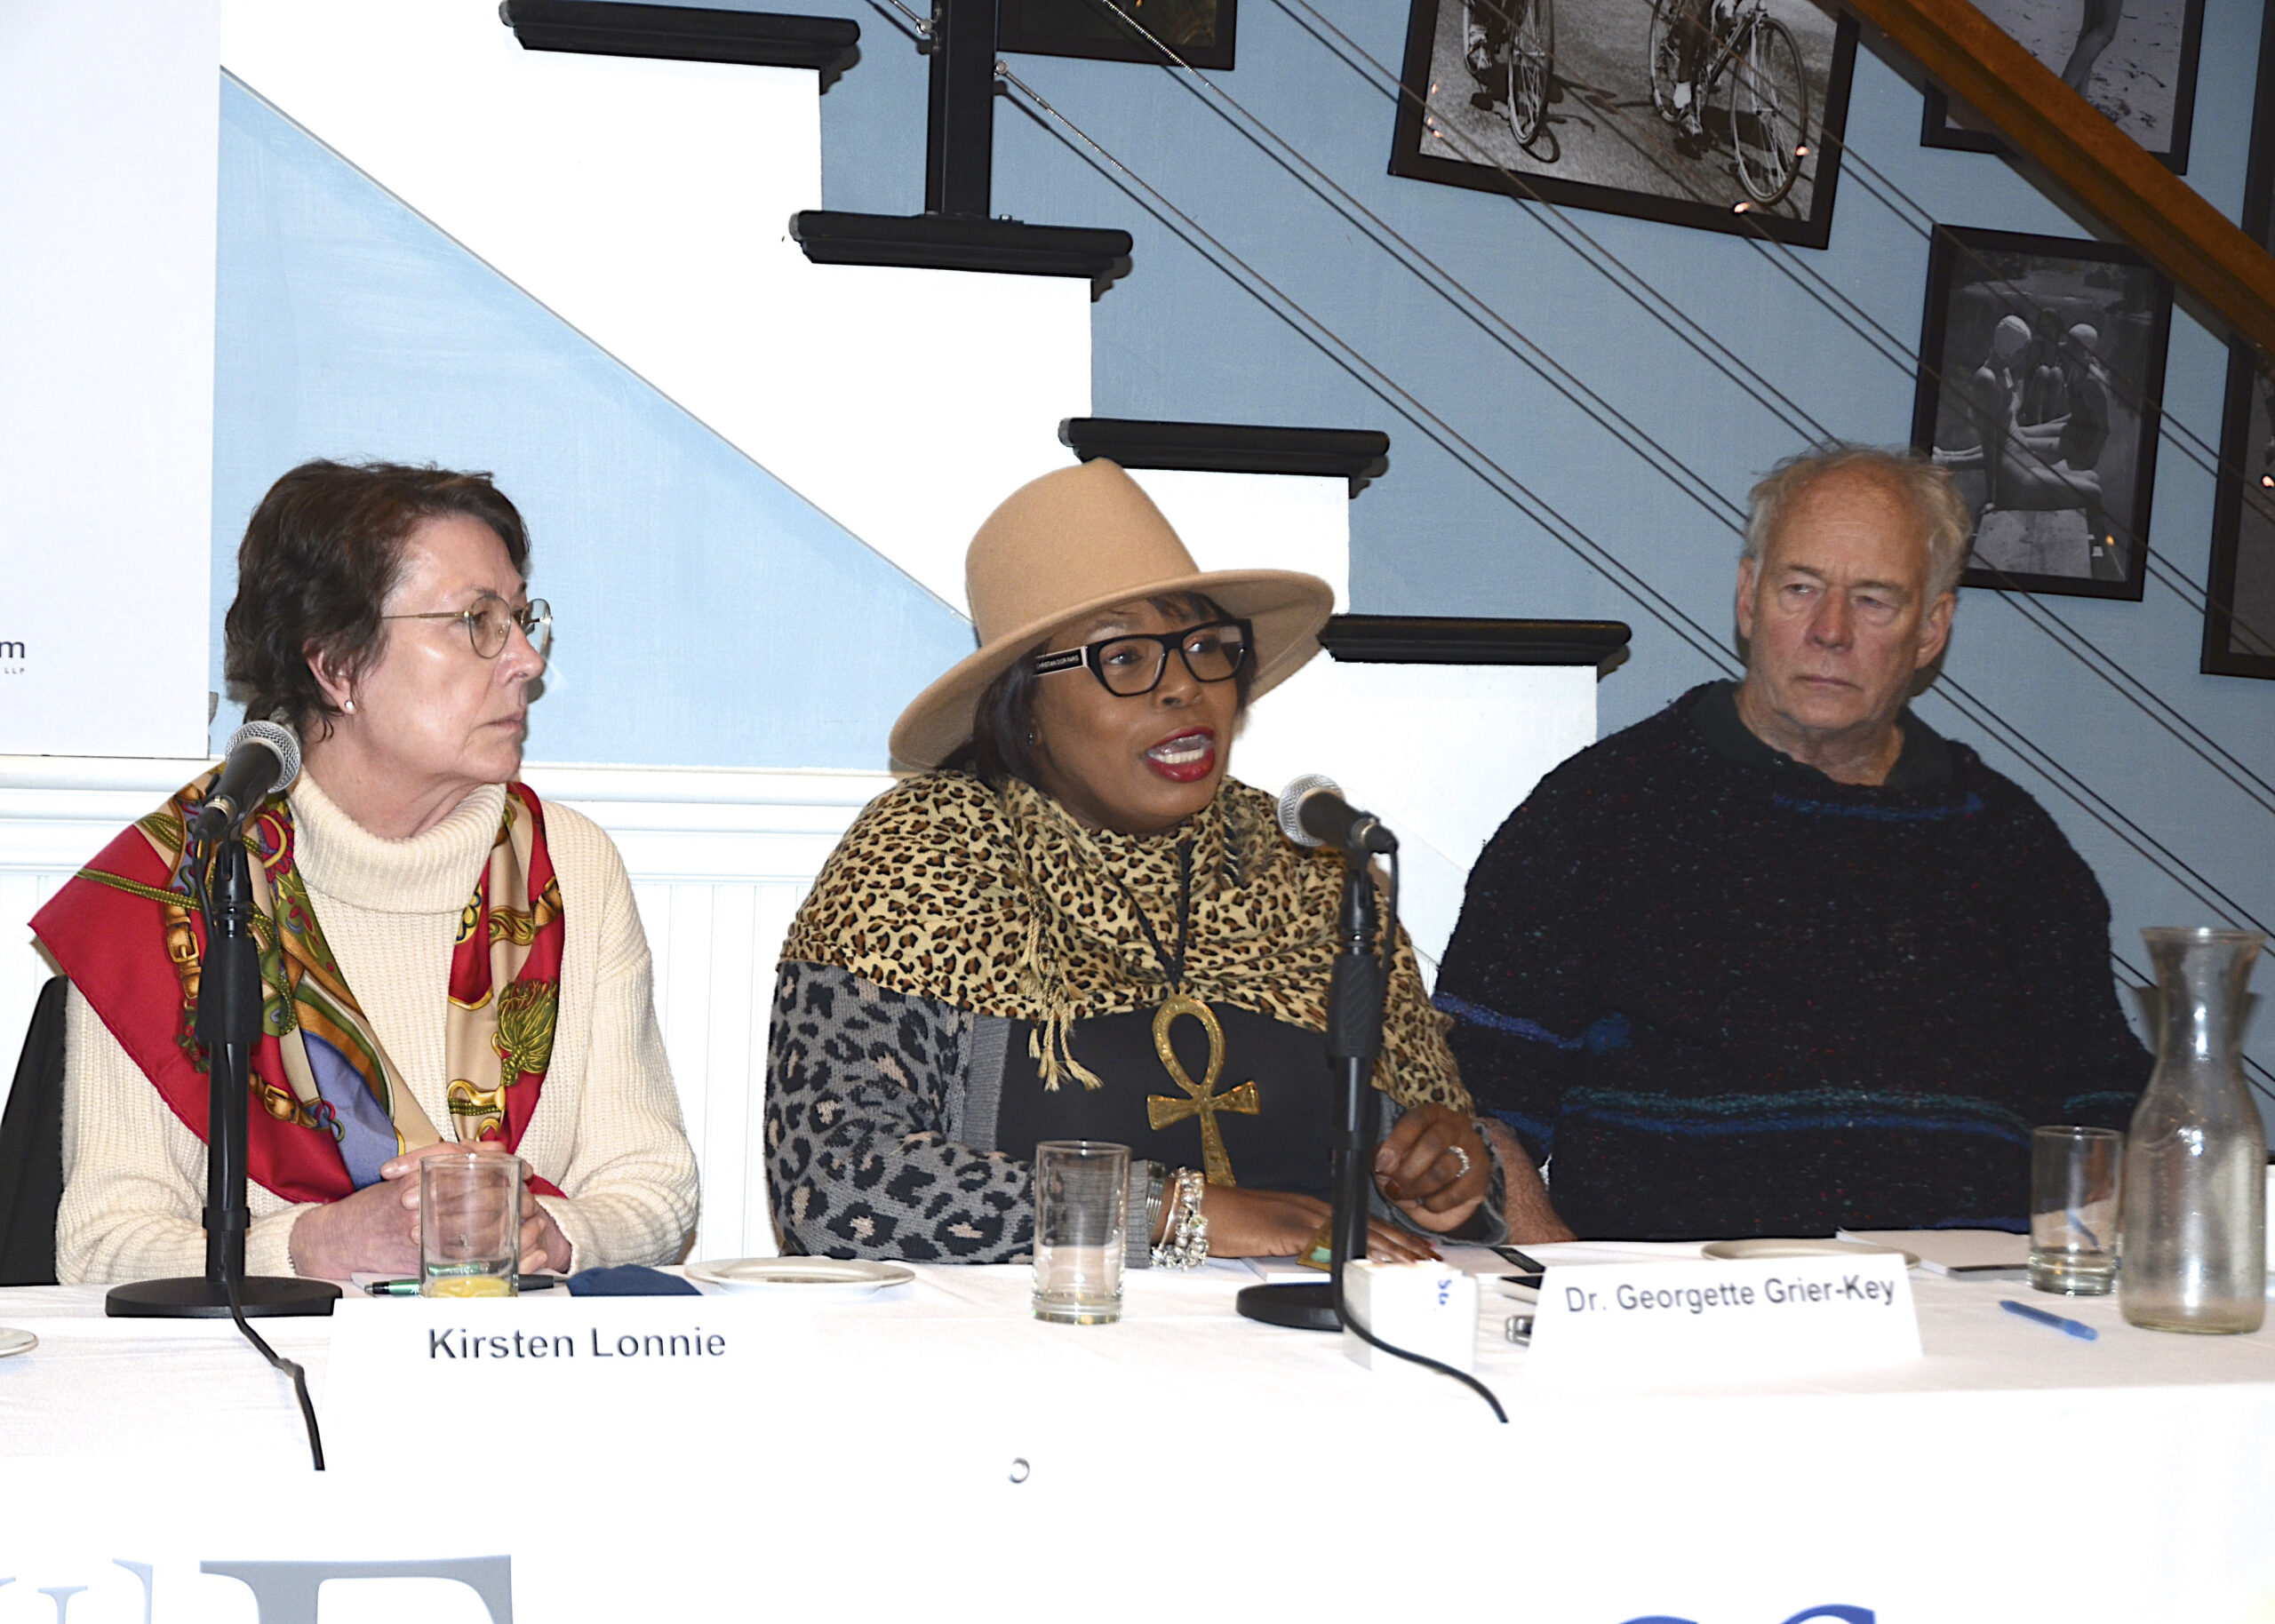 Panelists Kirsten Lonnie, Dr. Georgette Grier-Key and Paton Miller at the Express Session on January 12.   KYRIL BROMLEY